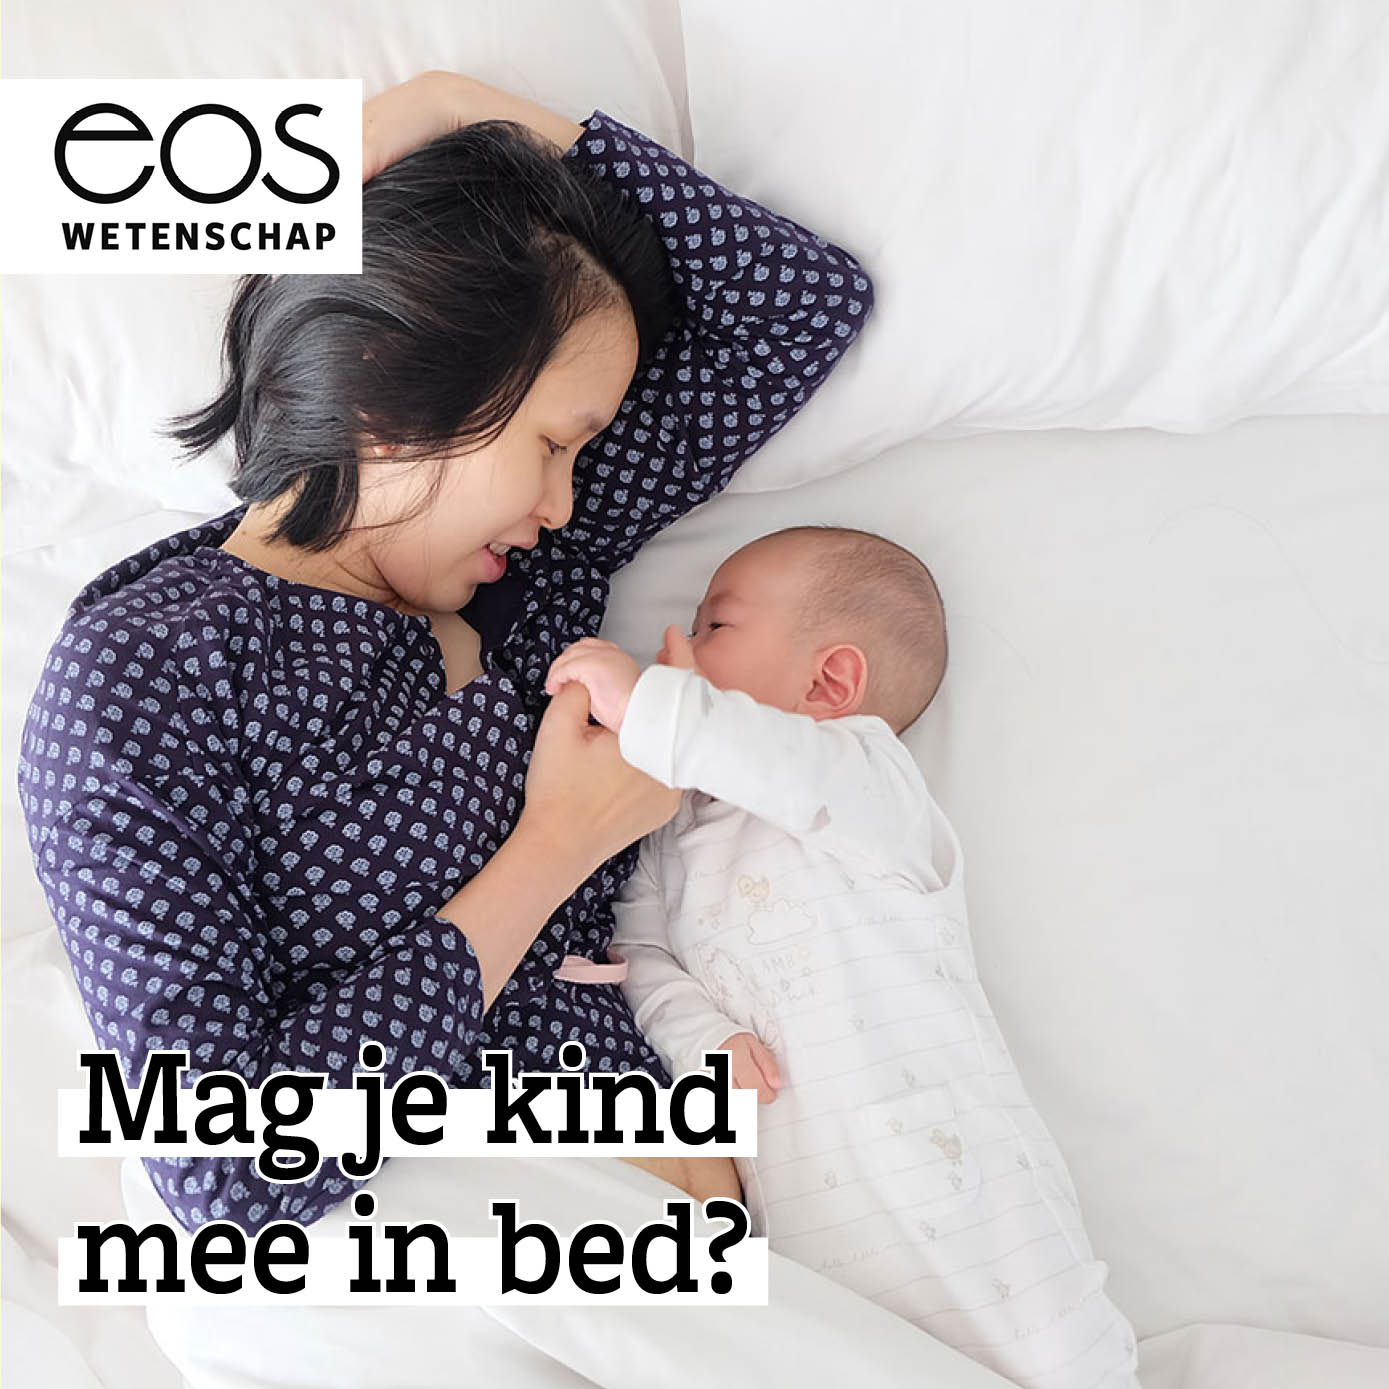 Mag je kind mee in bed?